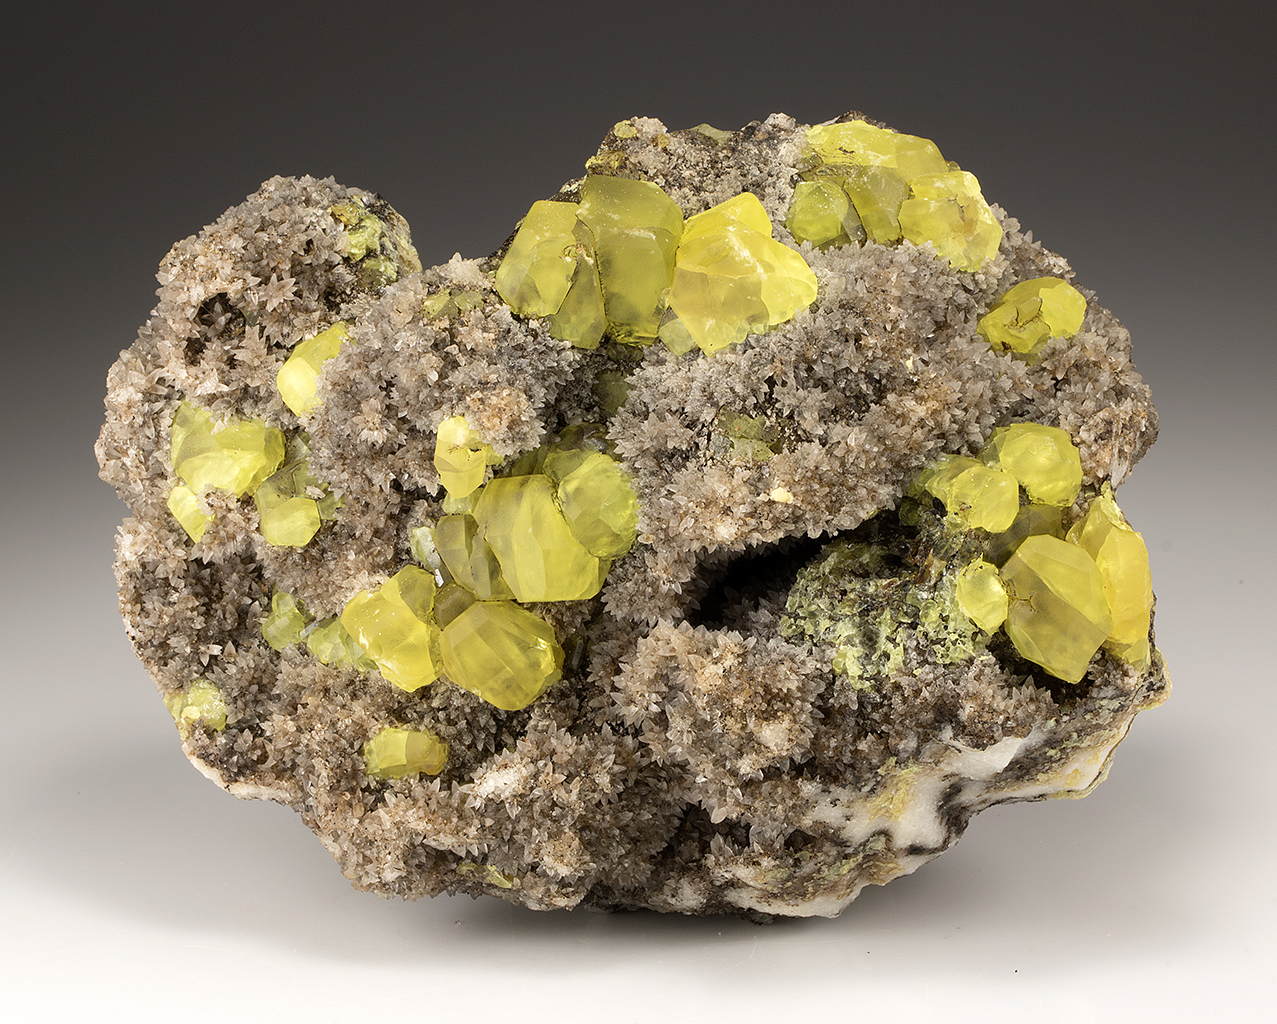  Sulfur  Minerals For Sale 2453650